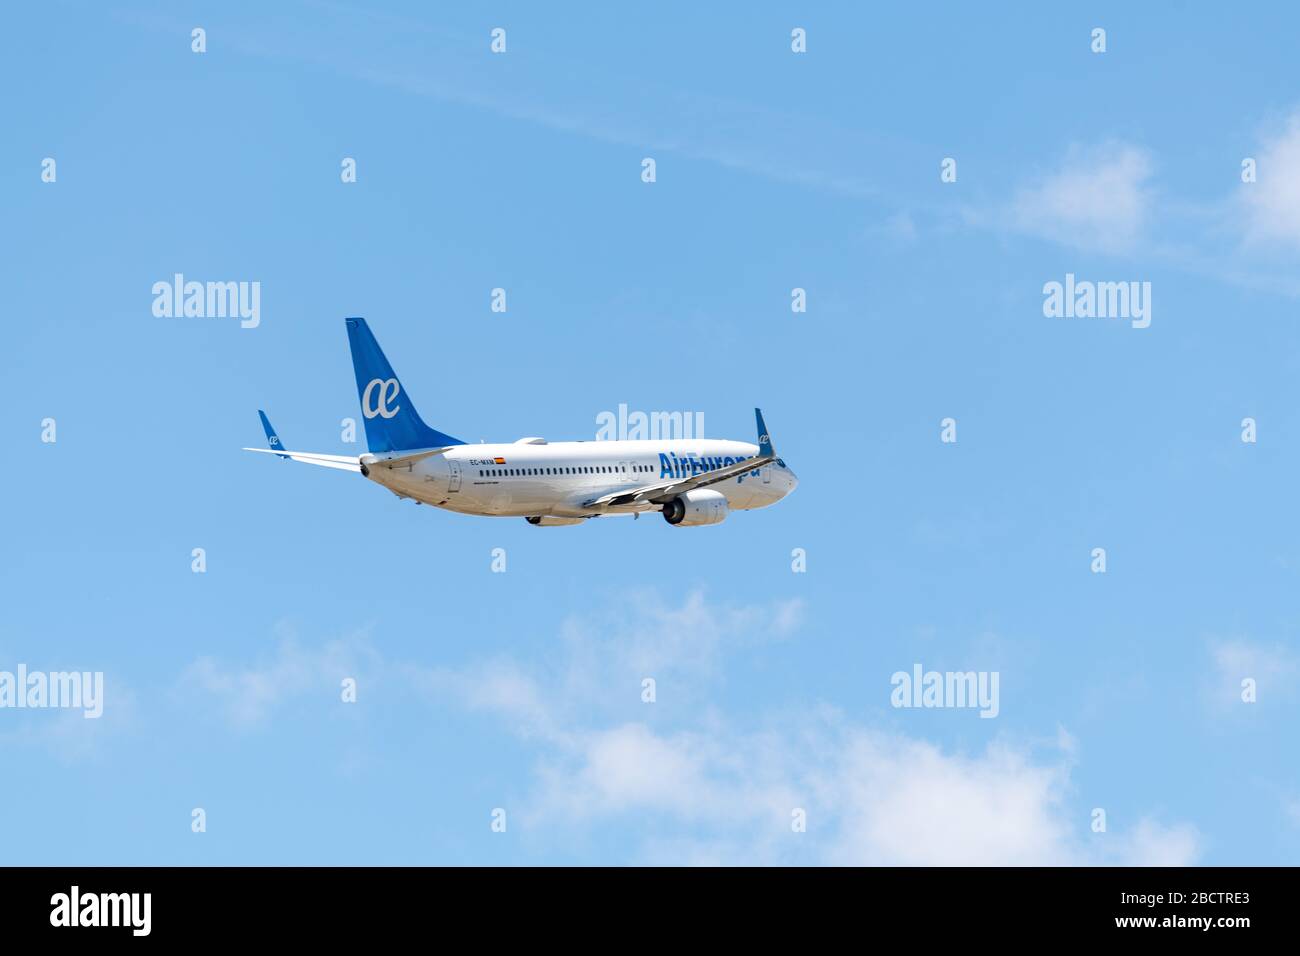 MADRID, SPAIN - APRIL 14, 2019: Air Europa airlines Boeing 737 NG / Max passenger plane taking off from Madrid-Barajas International Airport Adolfo Su Stock Photo